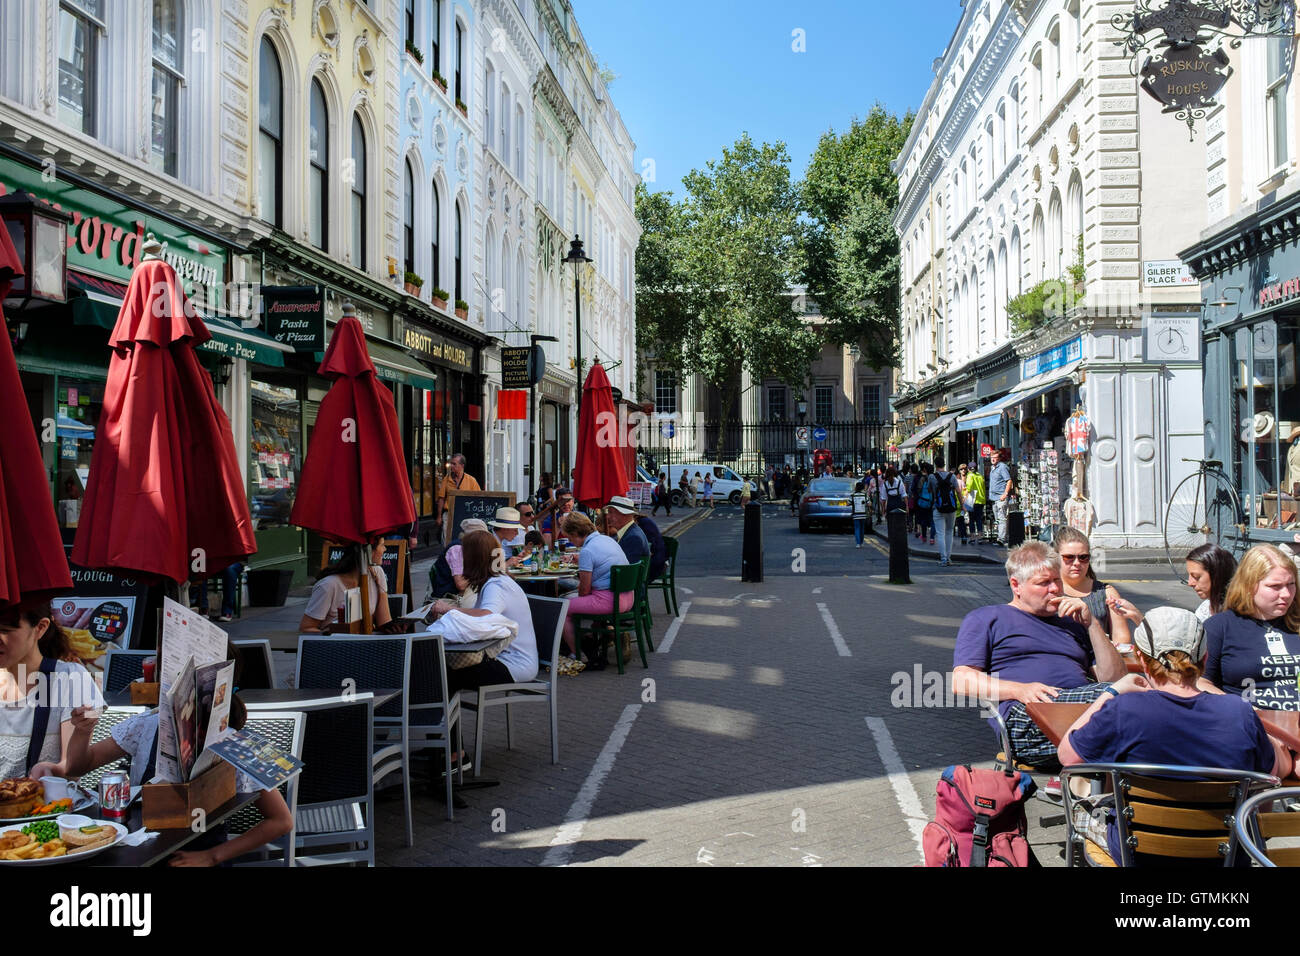 Diners outside cafe, Museum street, Bloomsbury, London, UK Stock Photo